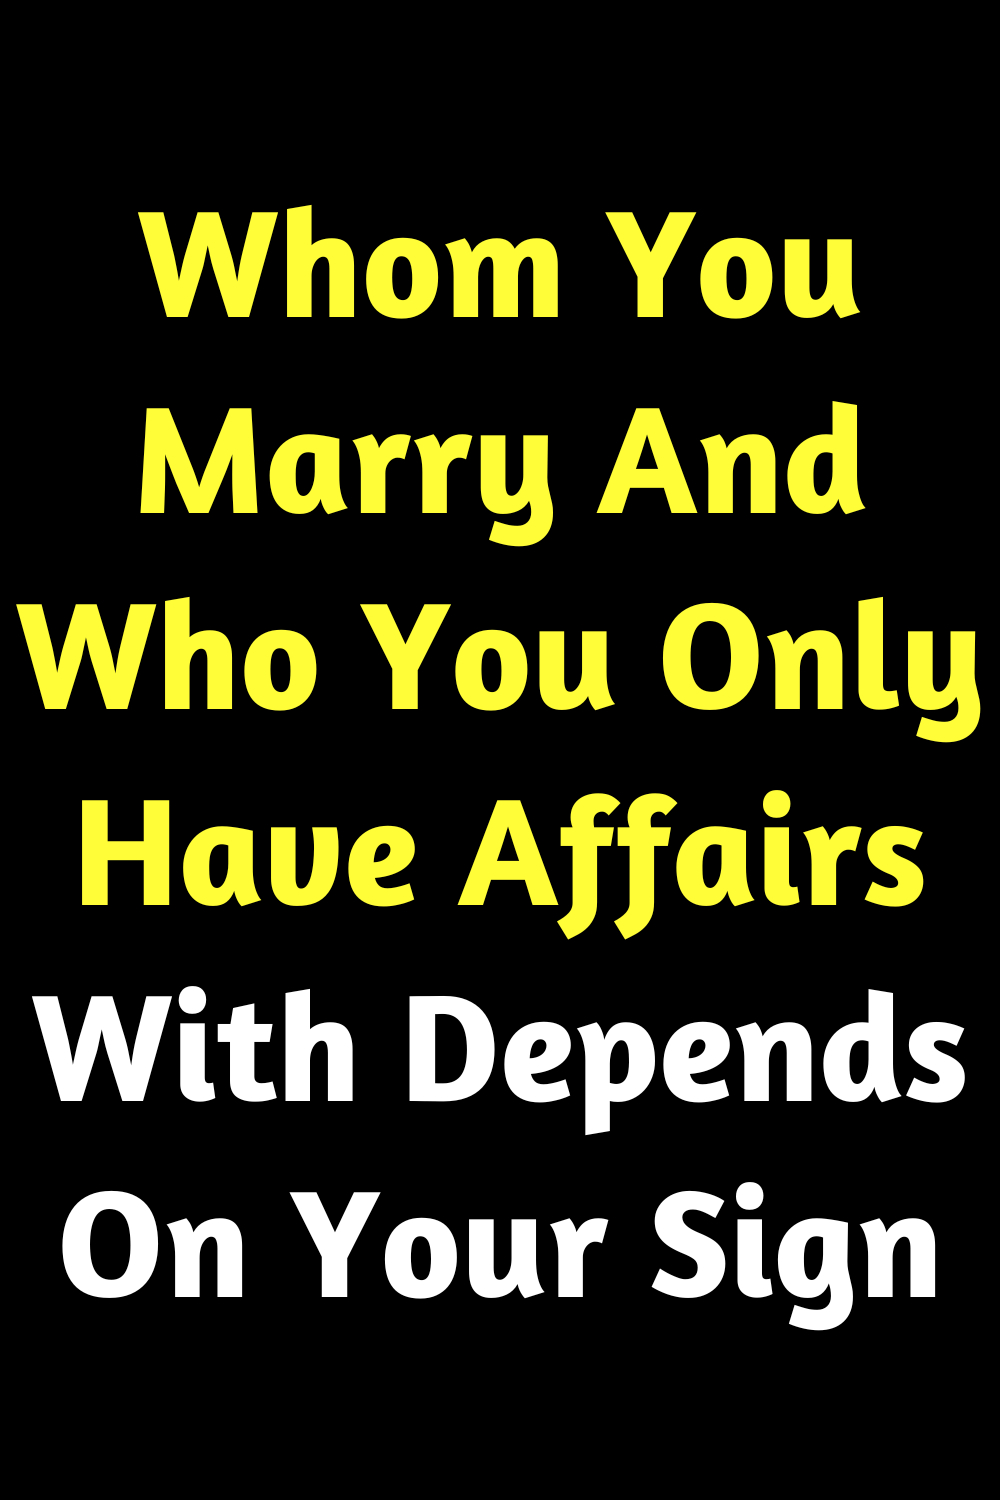 Who You Marry And Who You Only Have Affairs With Depends On Your Sign